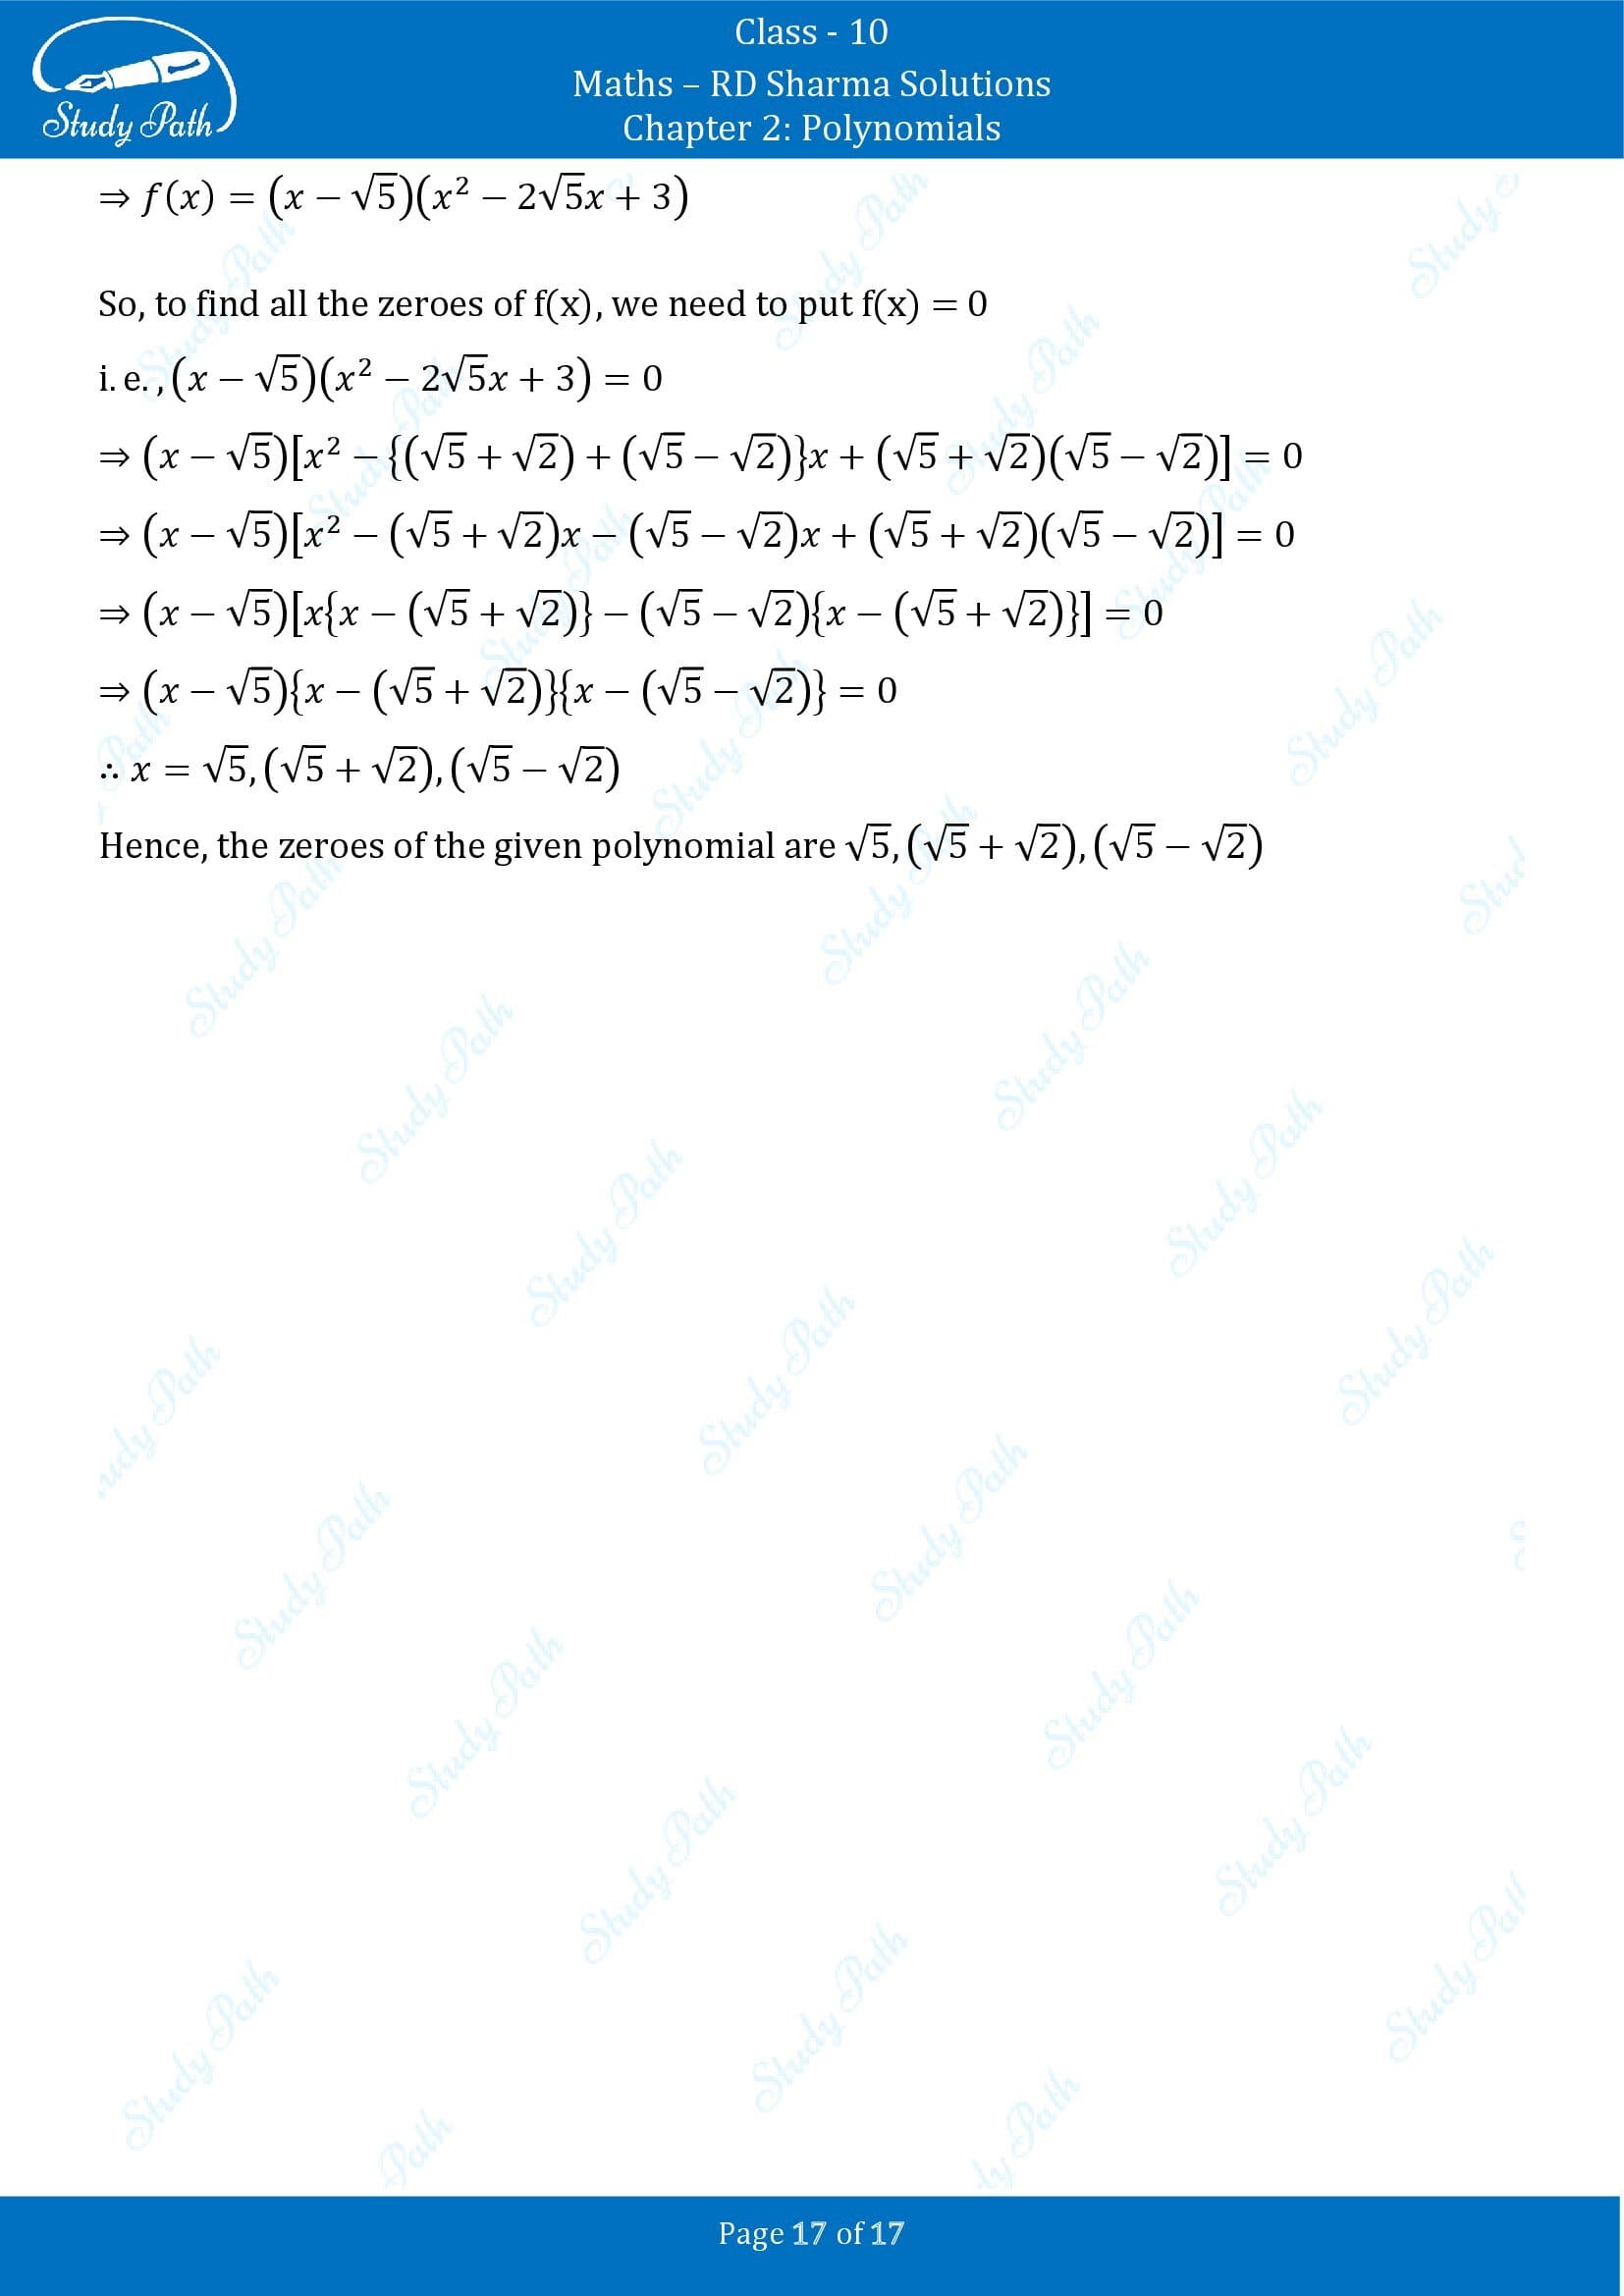 RD Sharma Solutions Class 10 Chapter 2 Polynomials Exercise 2.3 00017